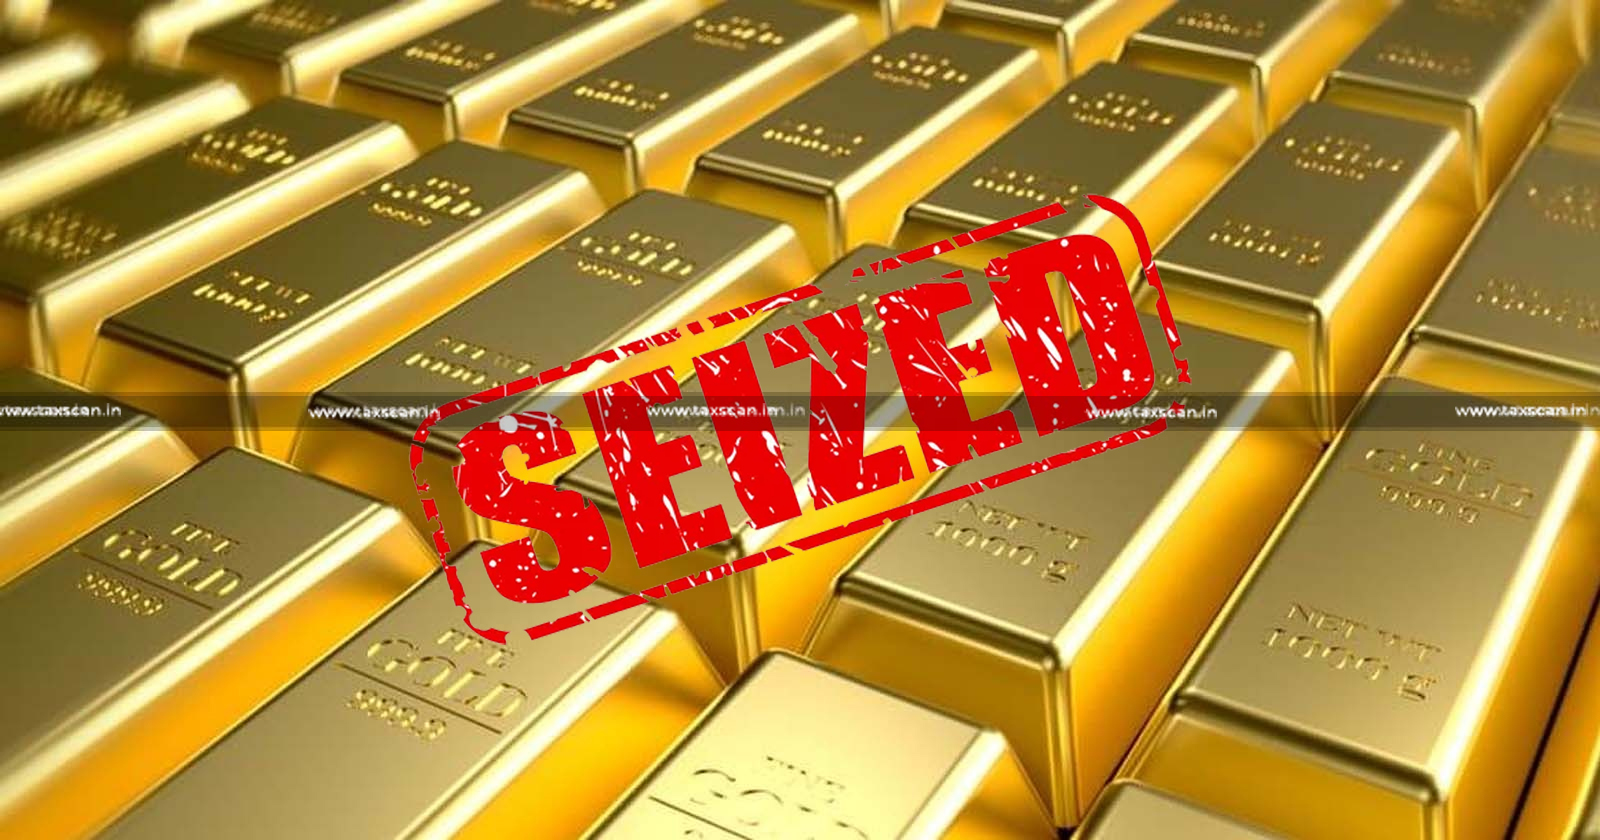 Gold- Smuggling -  Fabricated- Challan-CESTAT - Gold- Biscuit -Seized - Customs- Act-TAXSCAN